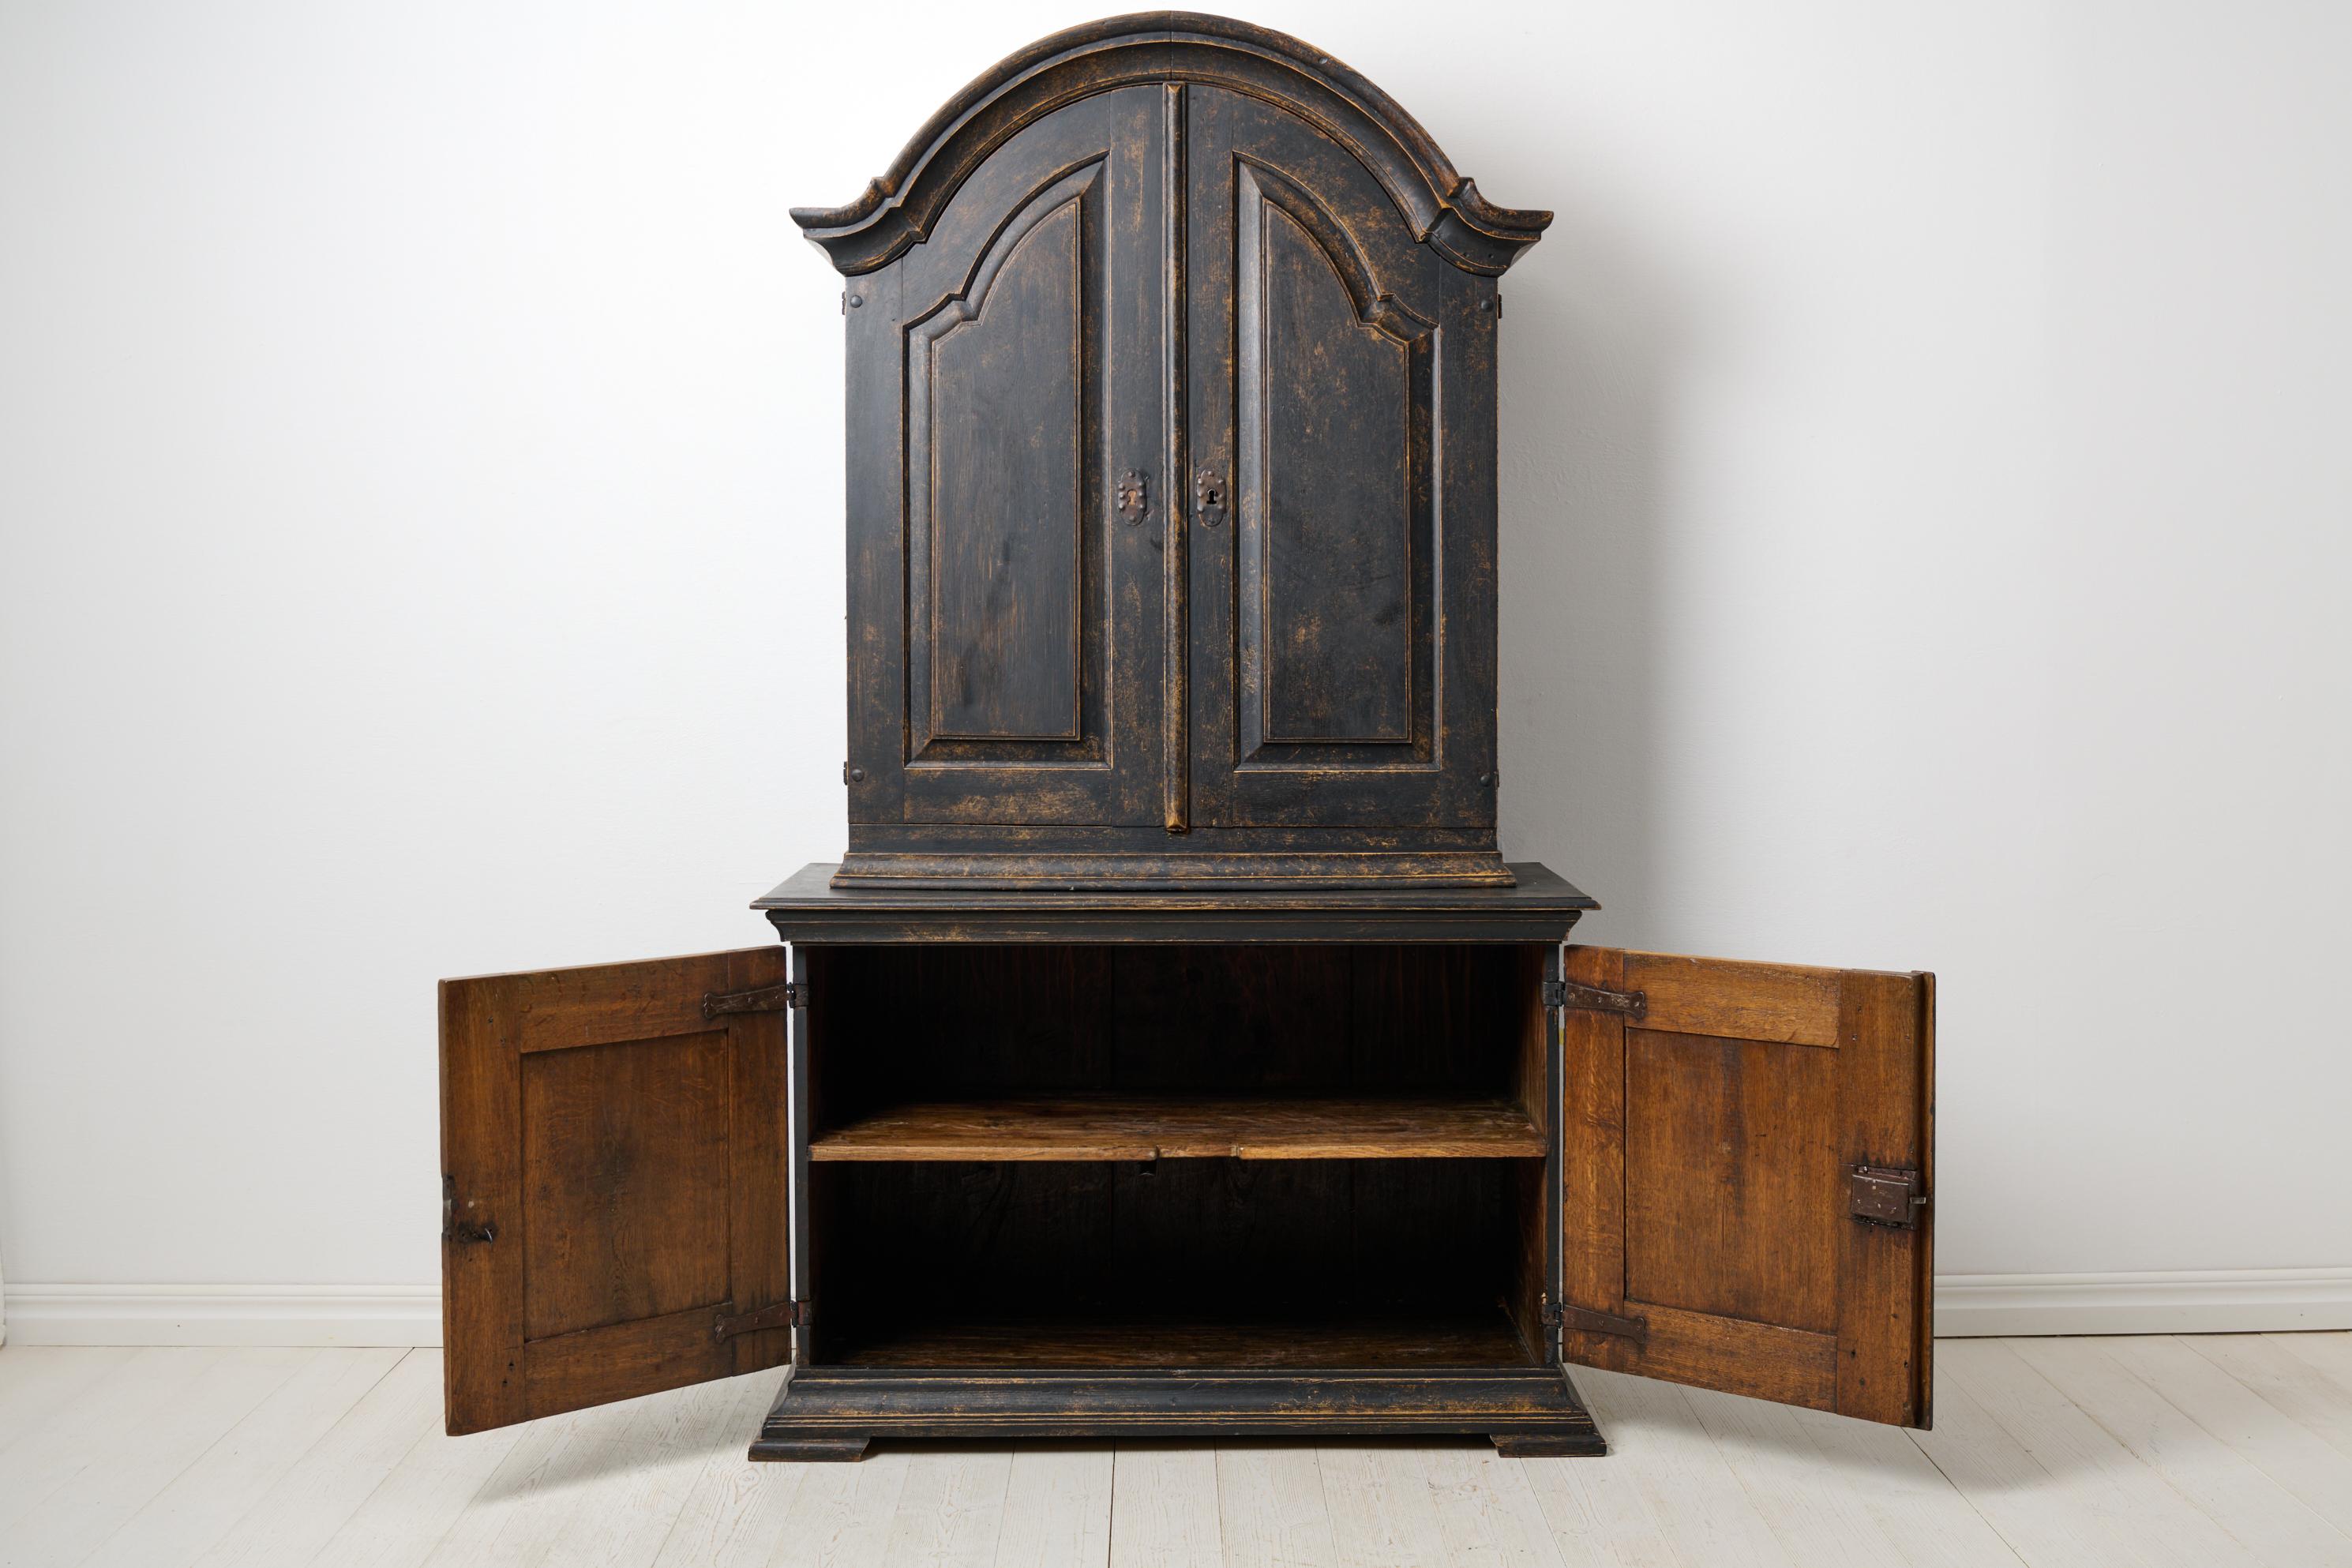 Antique Rococo Black Oak Cabinet, Large Swedish Solid 18th Century Cabinet In Good Condition For Sale In Kramfors, SE